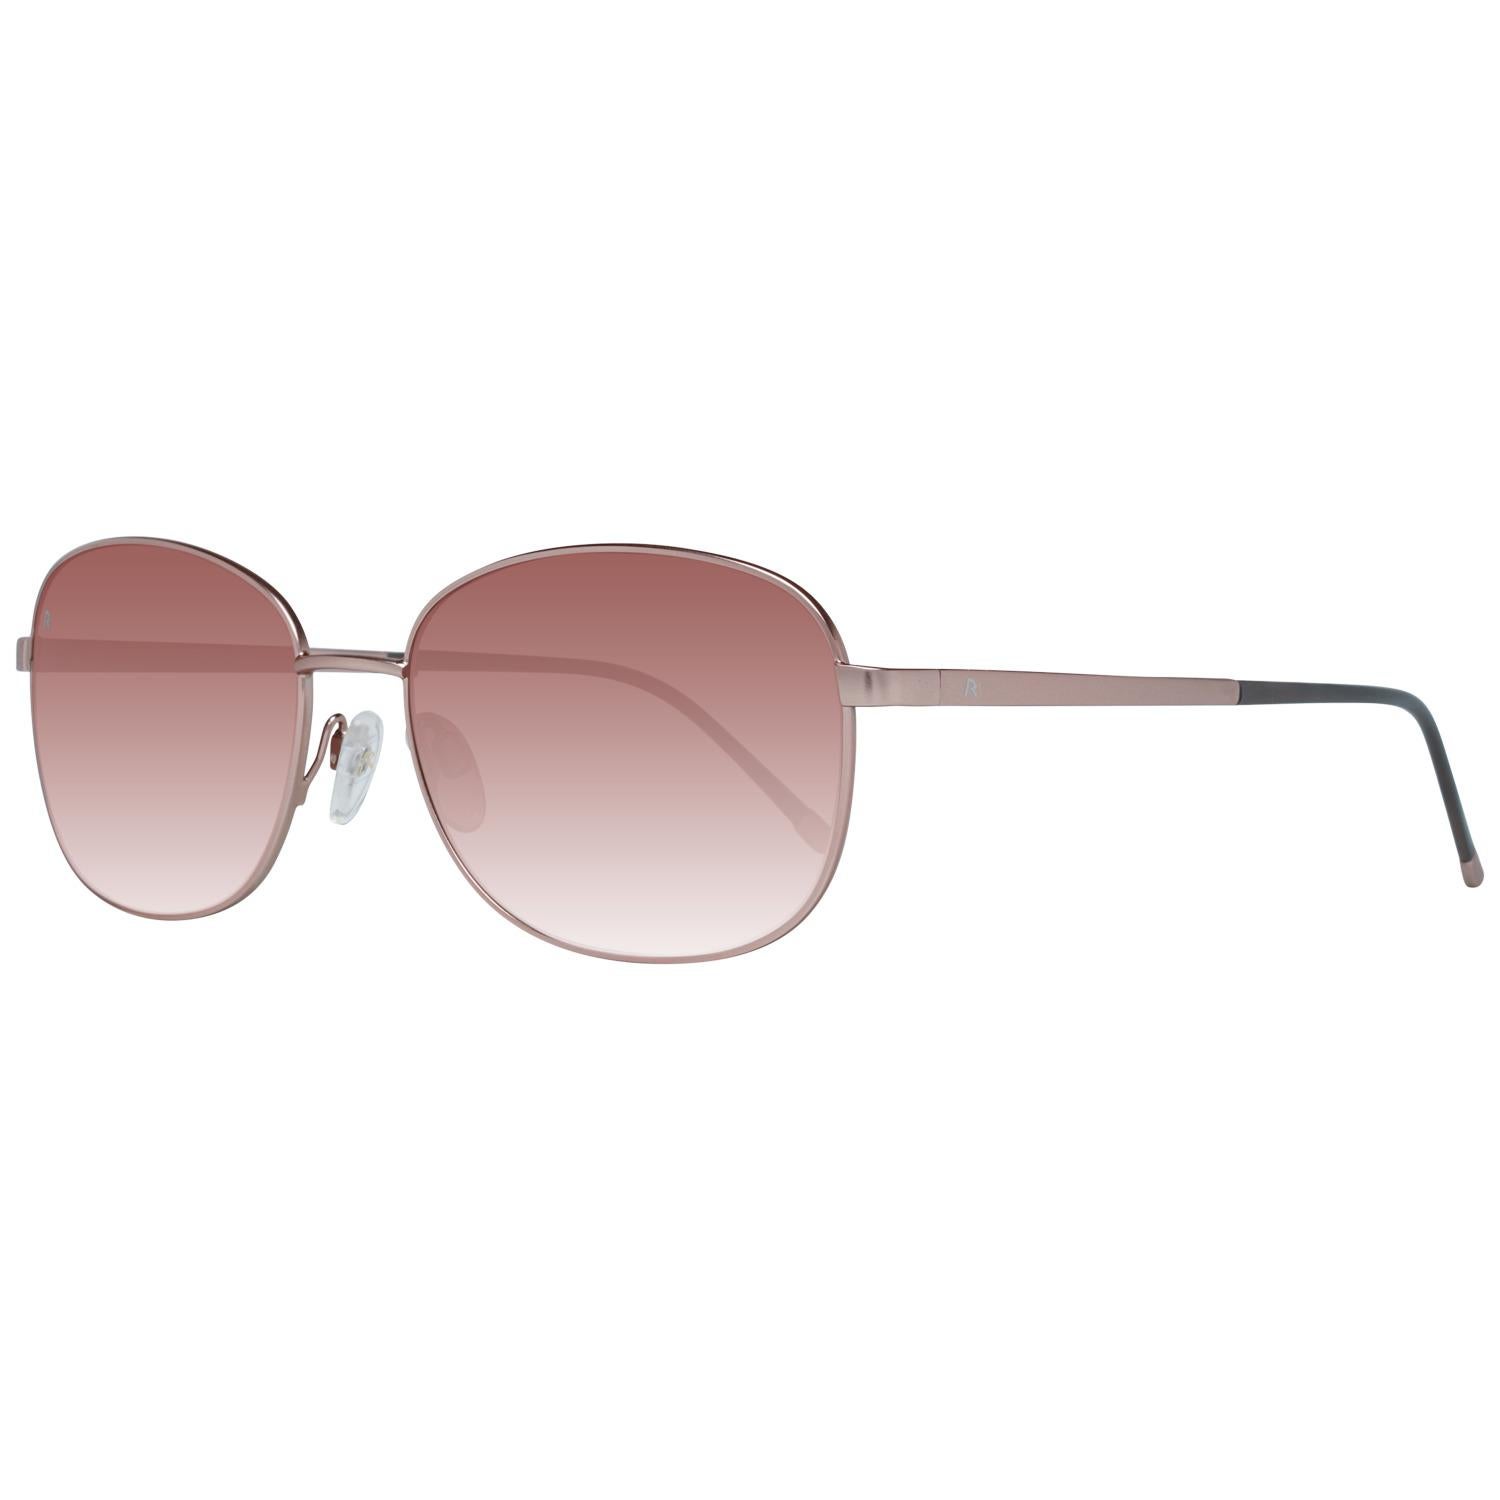 Details

MATERIAL: Metal

COLOR: Rose Gold

MODEL: R7410-C-5716-135-V625-E41

GENDER: Women

COUNTRY OF MANUFACTURE: China

TYPE: Sunglasses

ORIGINAL CASE?: Yes

STYLE: Oval

OCCASION: Casual

FEATURES: Lightweight

LENS COLOR: Pink

LENS